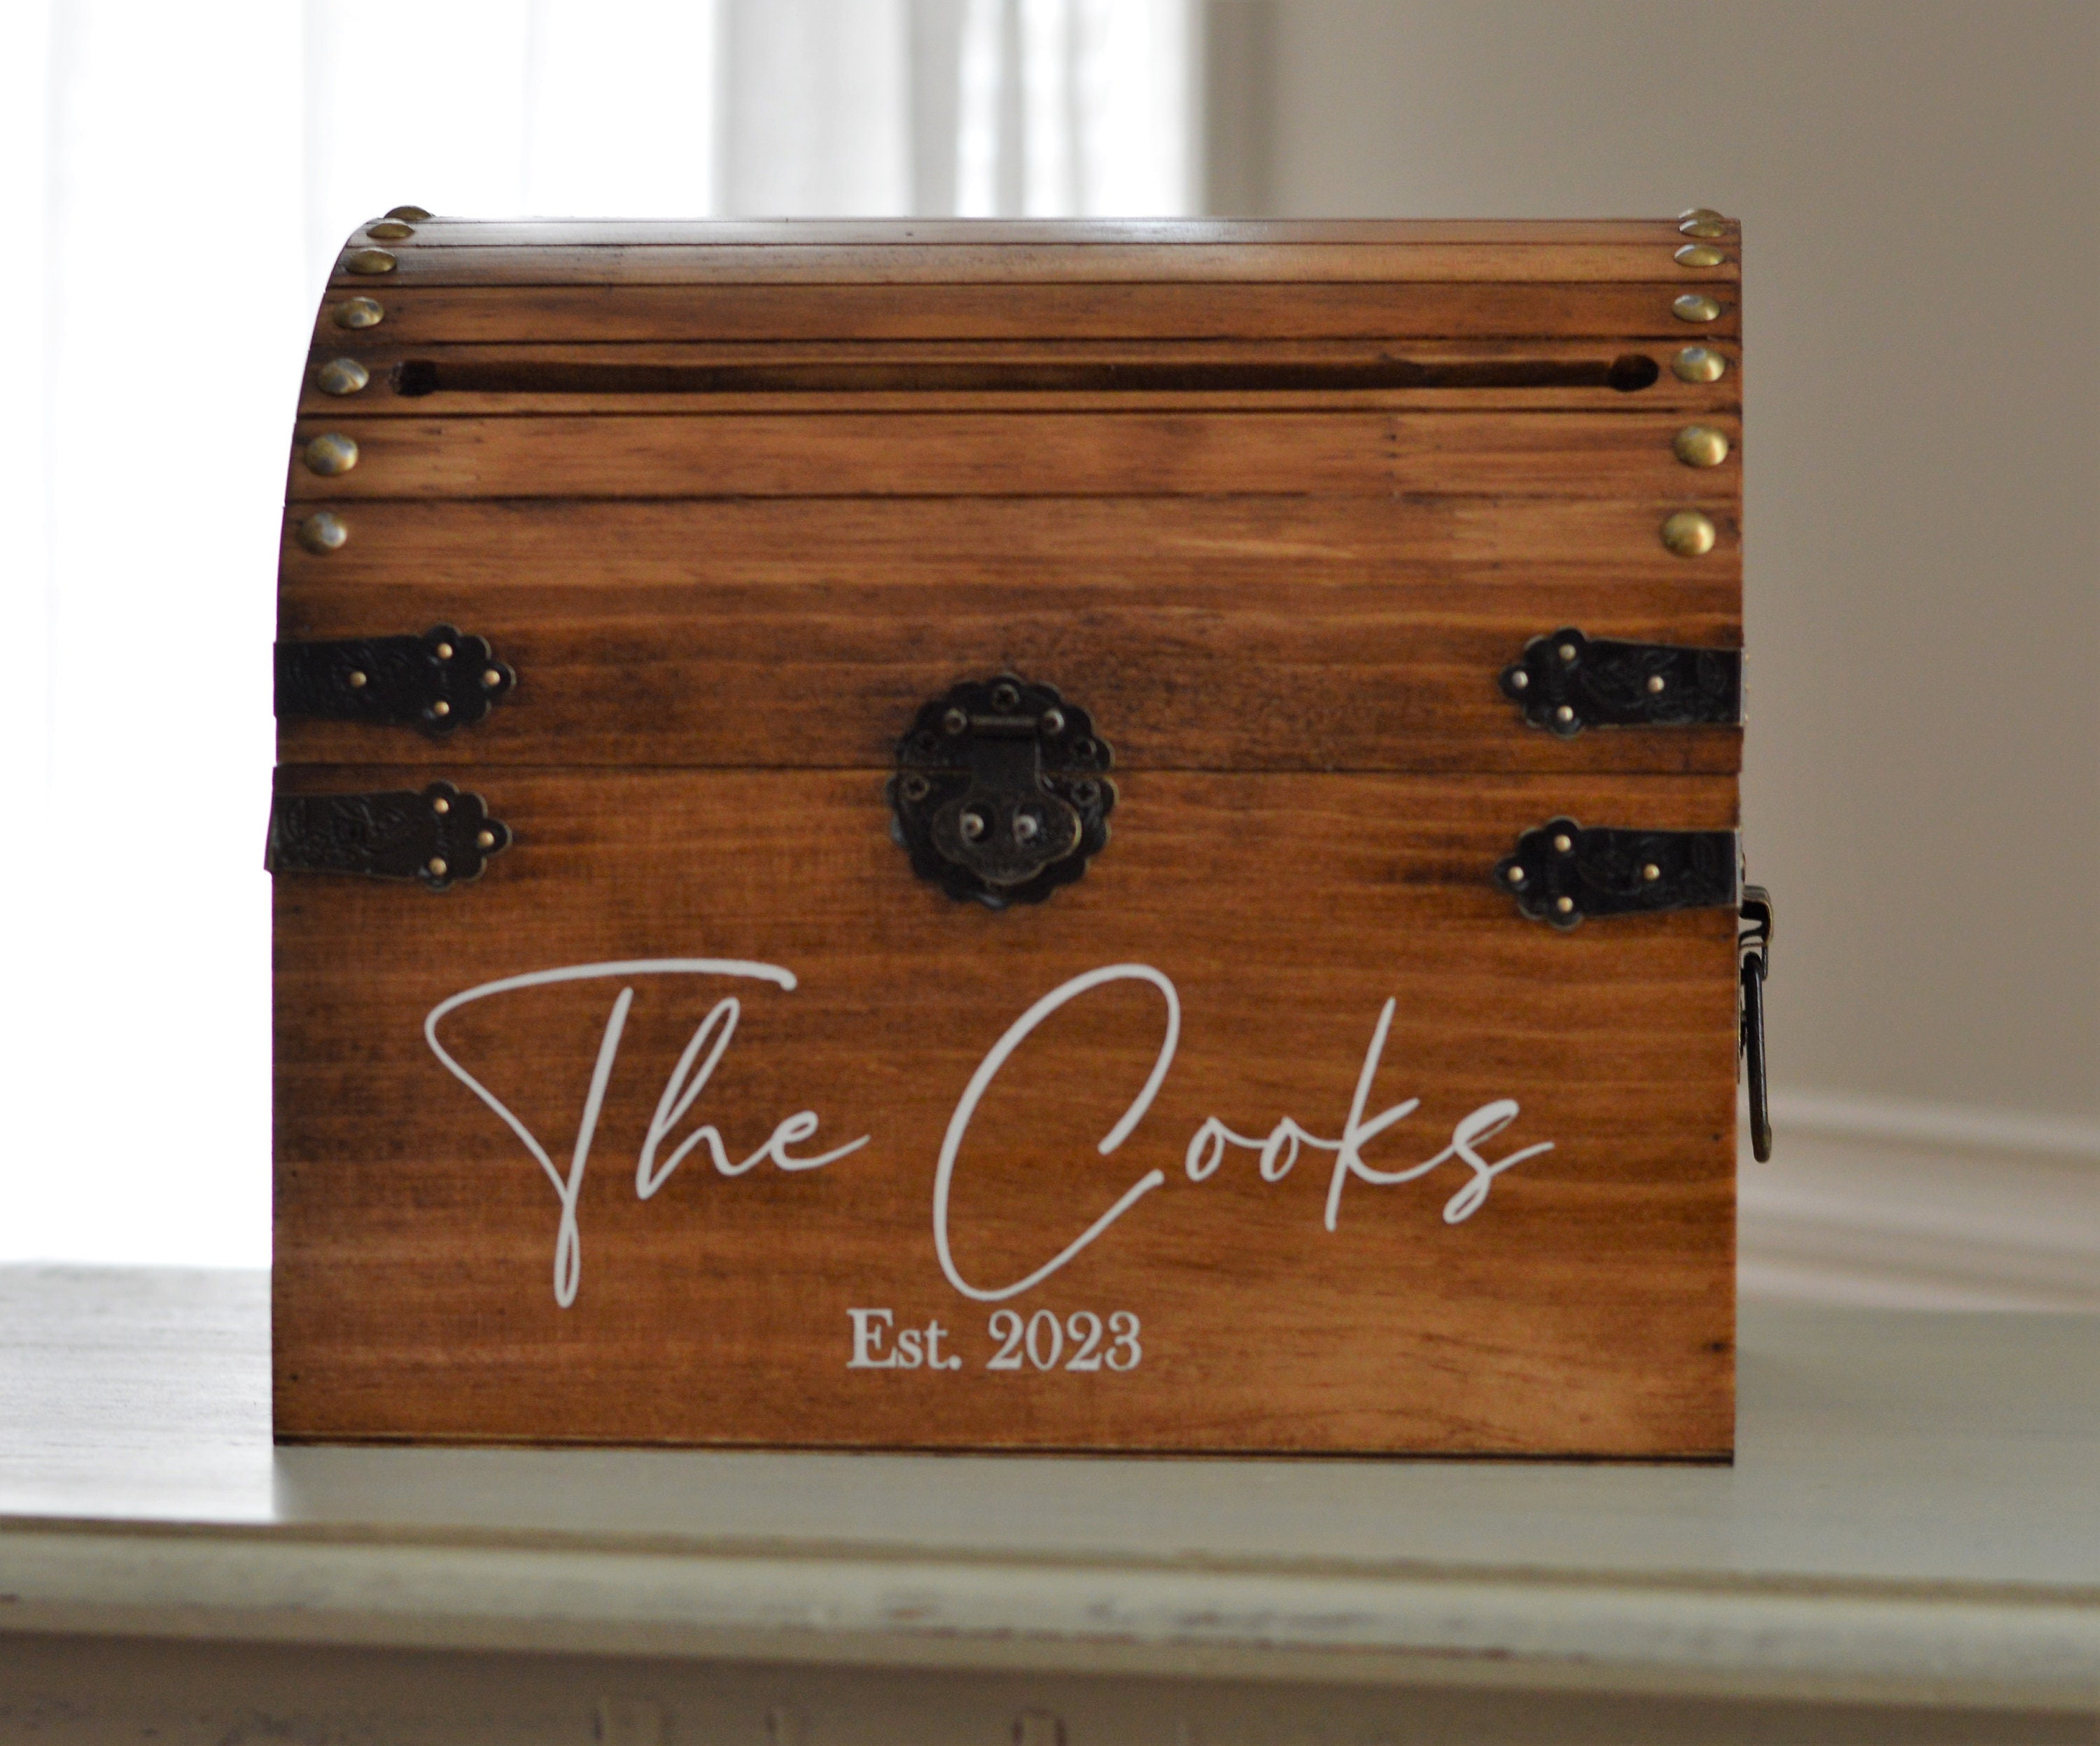 Wooden Card Box With Cards Banner Personalized Wedding Cards Holder  Customized Keepsake Trunk